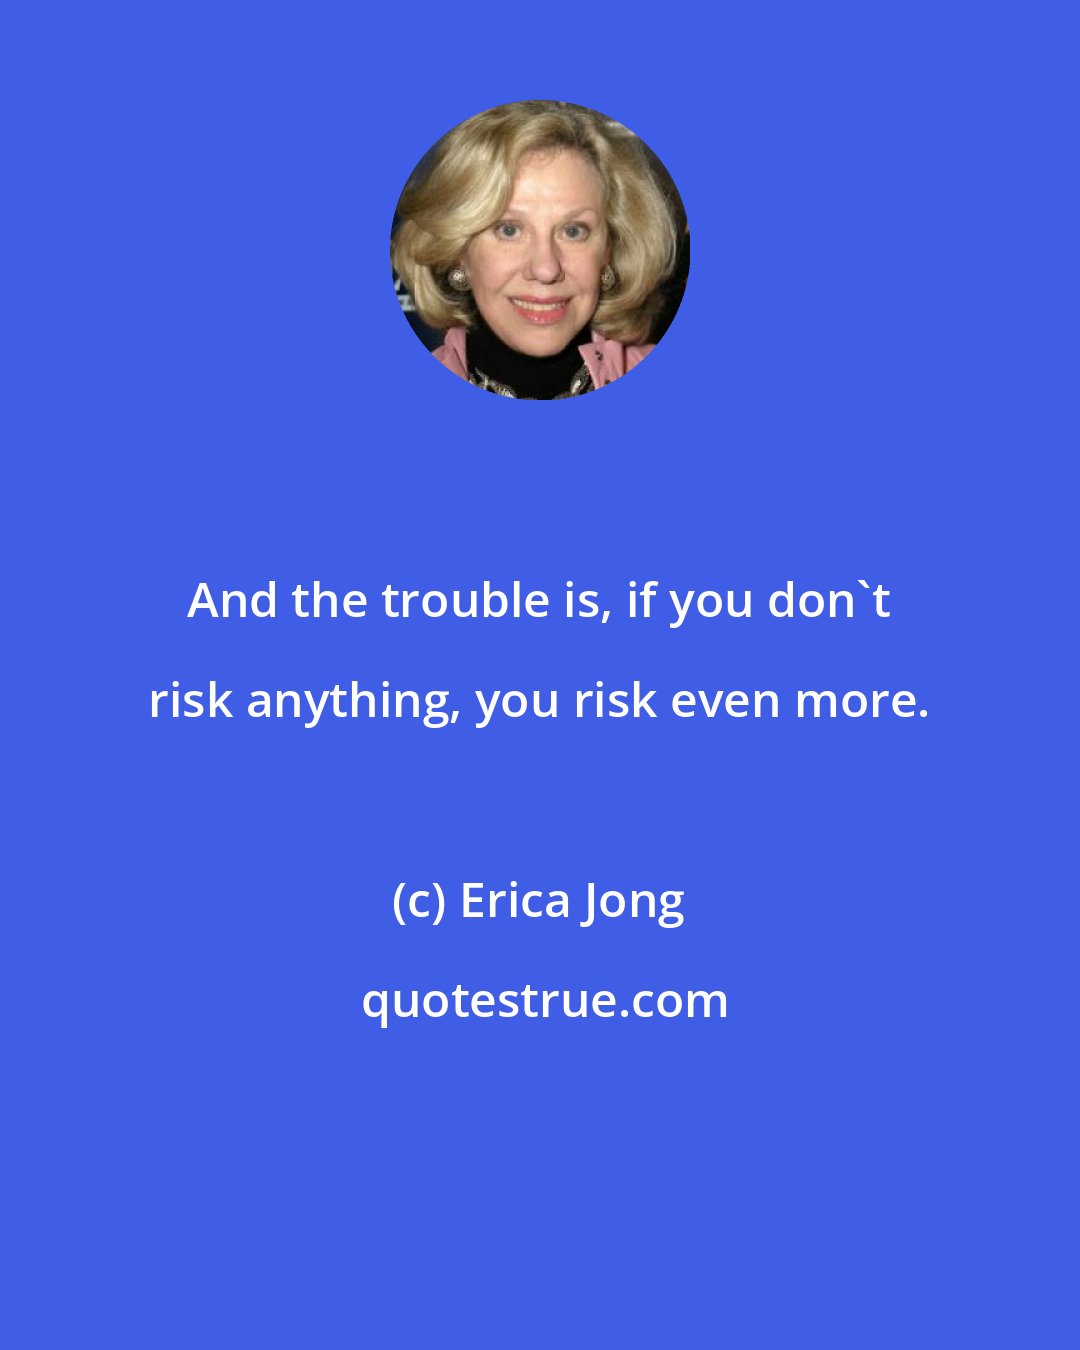 Erica Jong: And the trouble is, if you don't risk anything, you risk even more.